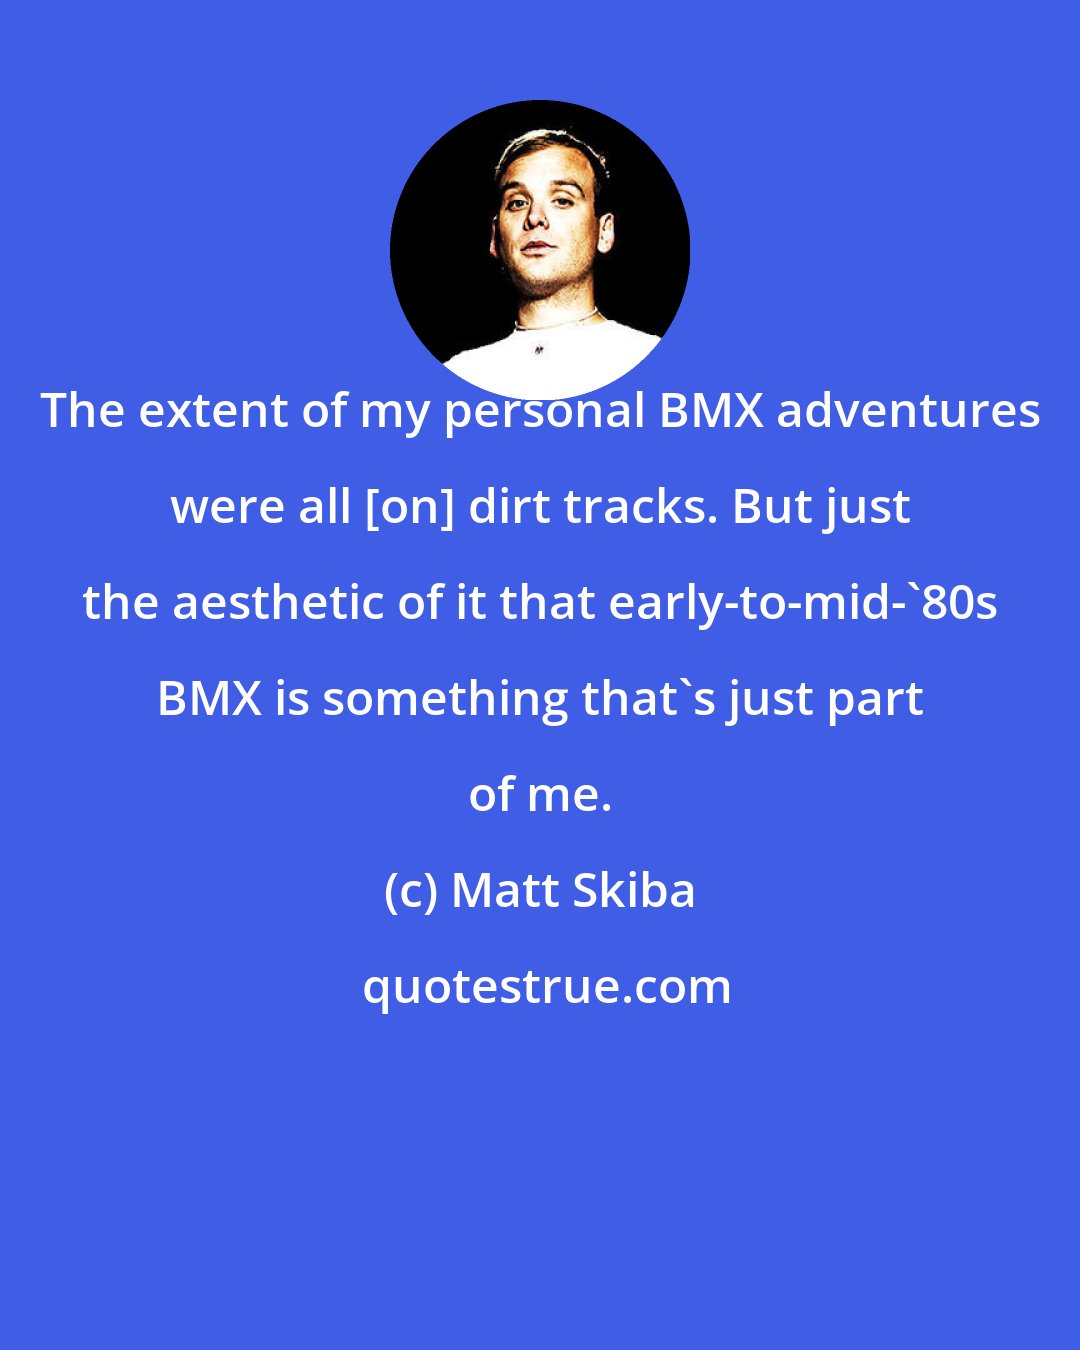 Matt Skiba: The extent of my personal BMX adventures were all [on] dirt tracks. But just the aesthetic of it that early-to-mid-'80s BMX is something that's just part of me.